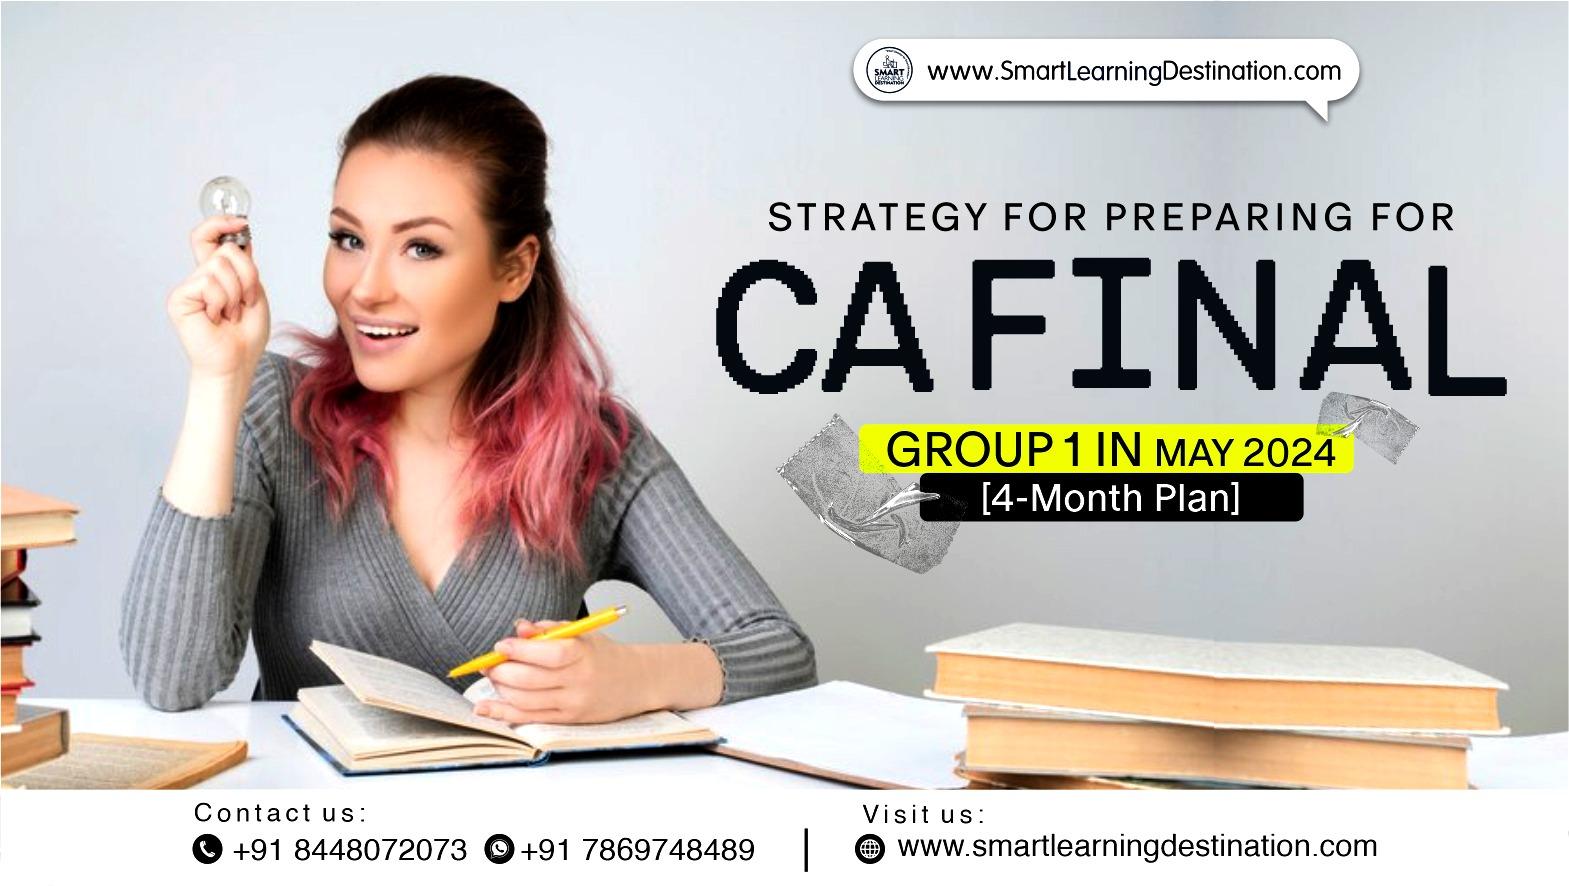 Strategy for Preparing for CA FINAL GROUP 1 in May 2024